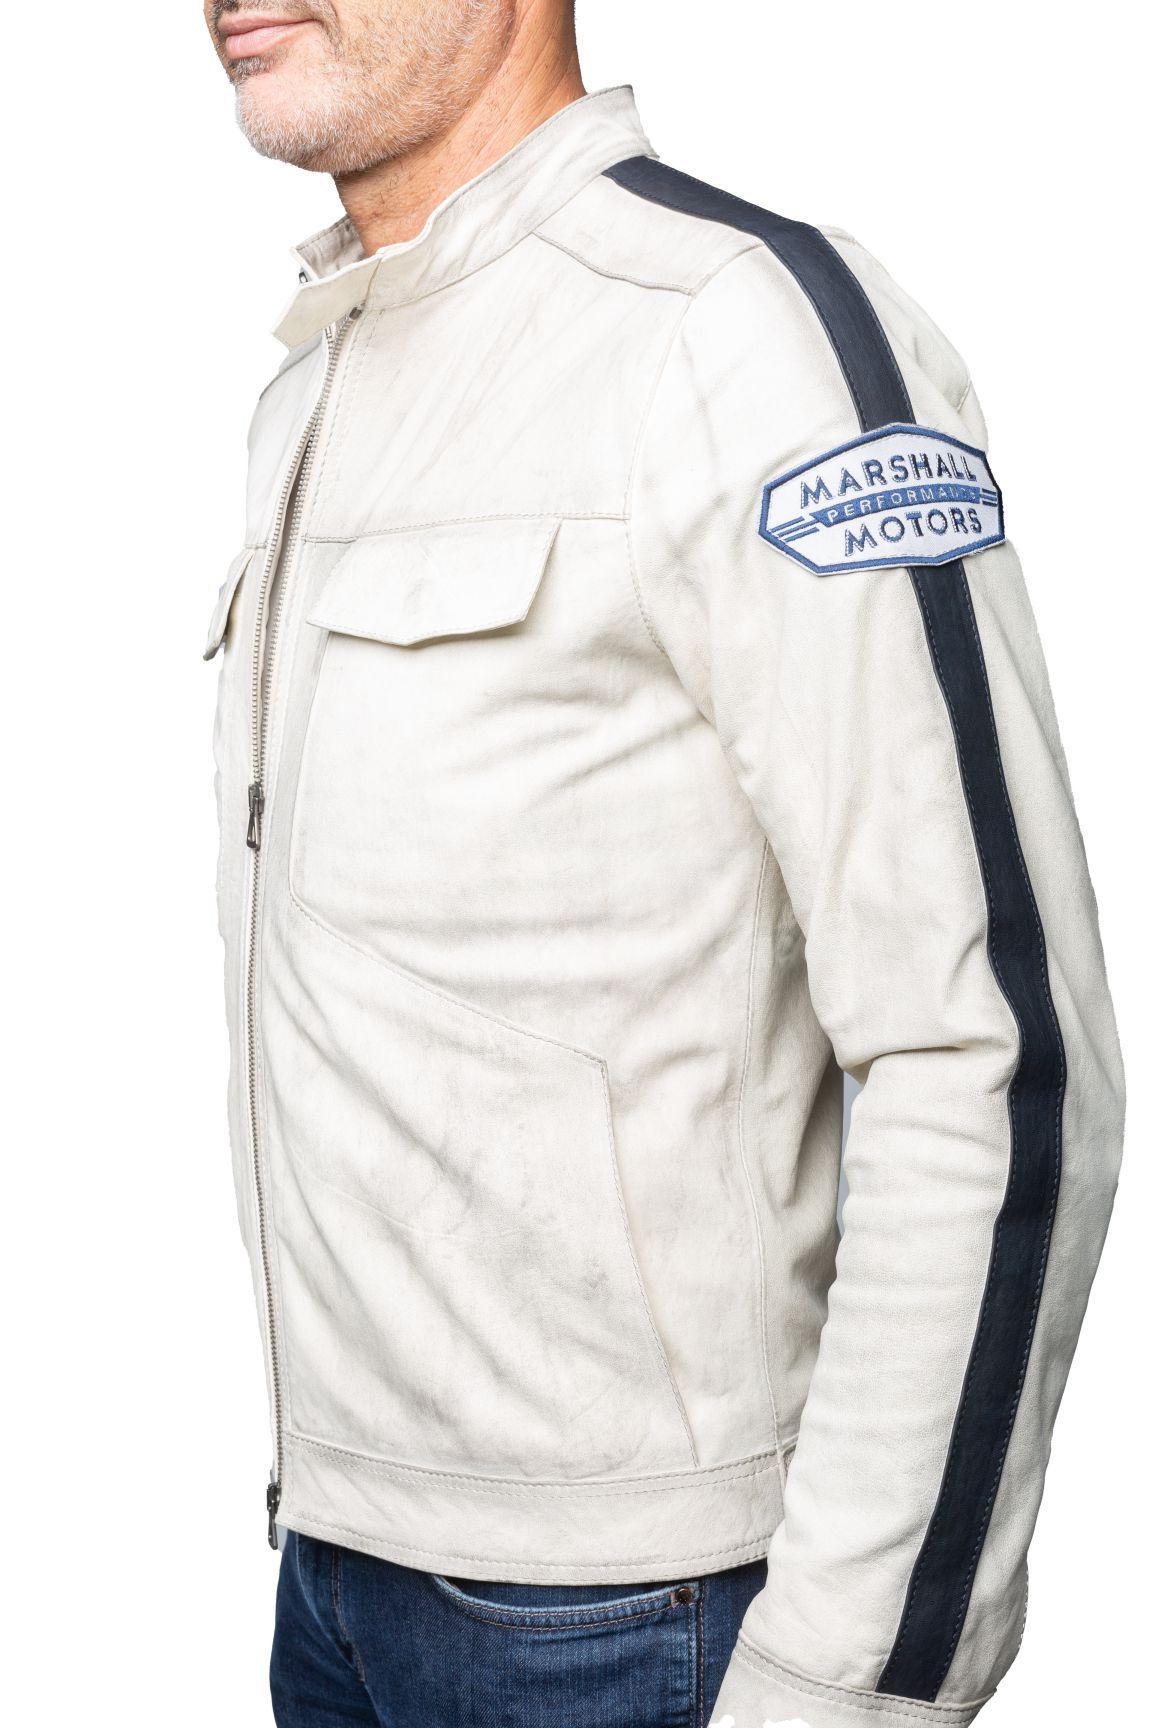 NFS Need for Speed Off White Racing Leather Jacket L